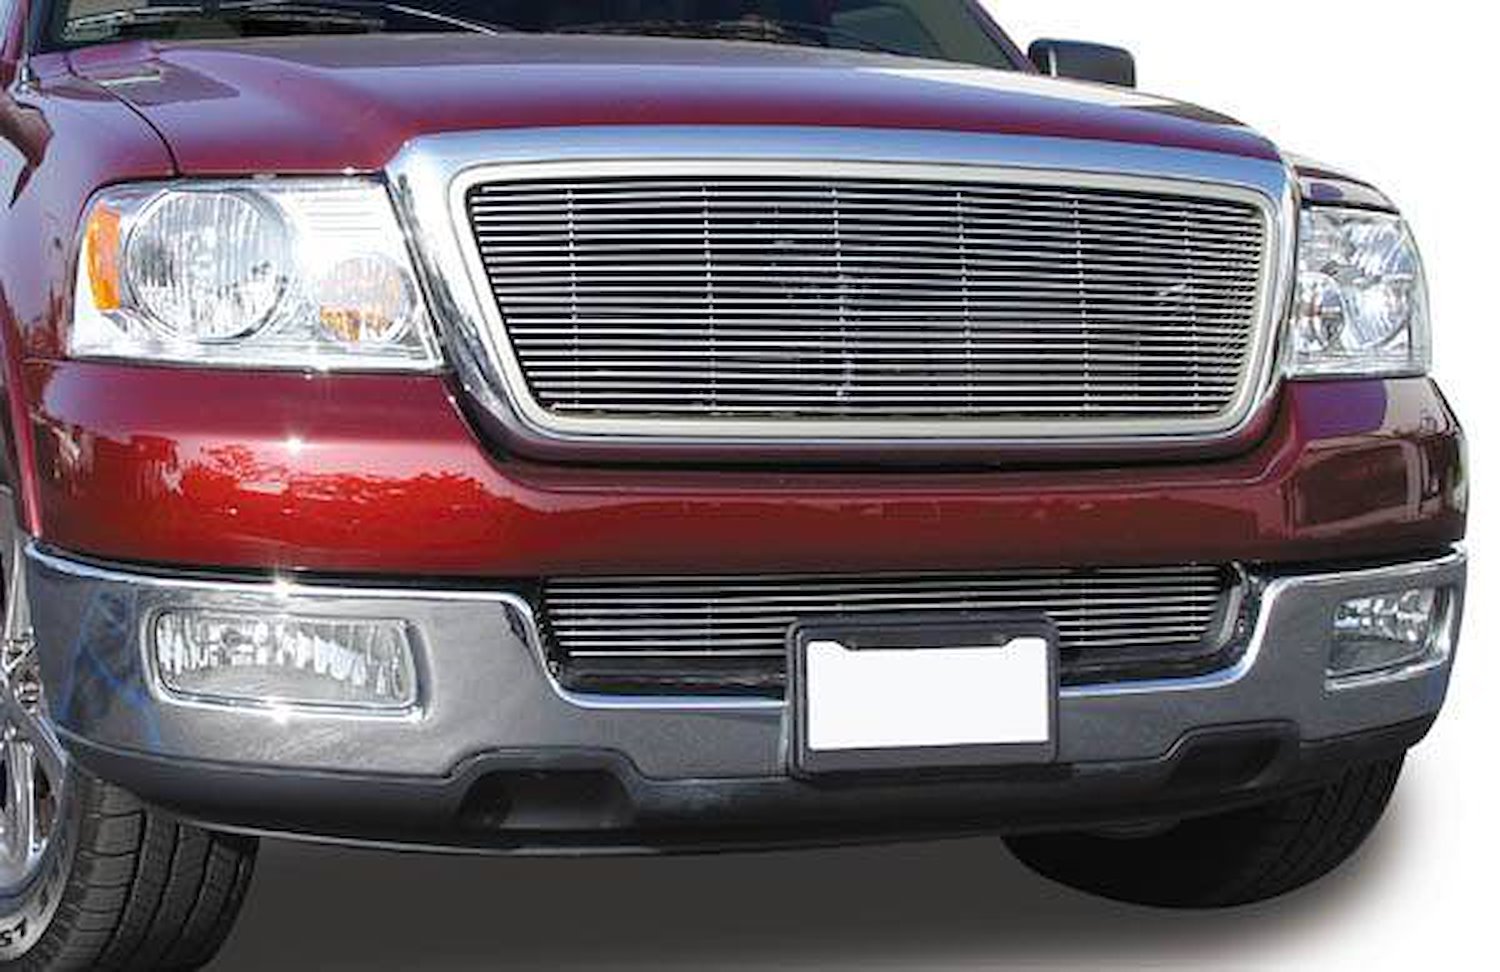 Billet Grille Overlay And Insert 2004-2008 Ford F-150 2WD & Lariat Models